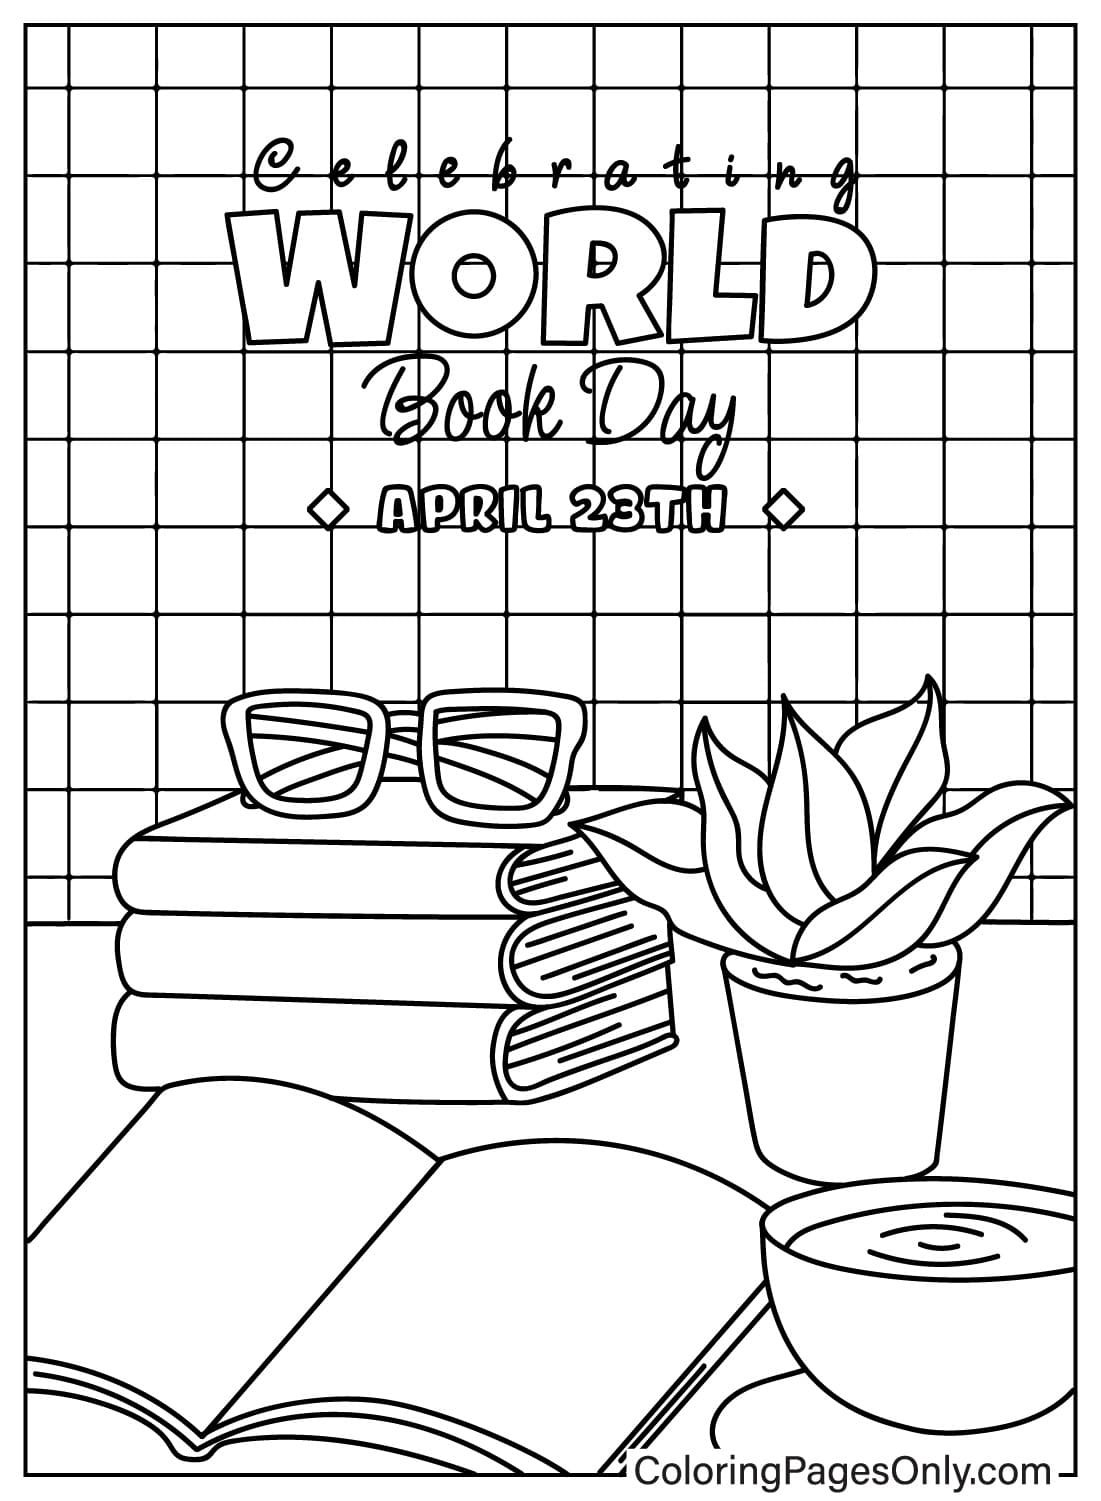 World Book Day Coloring Page for Adults from World Book Day